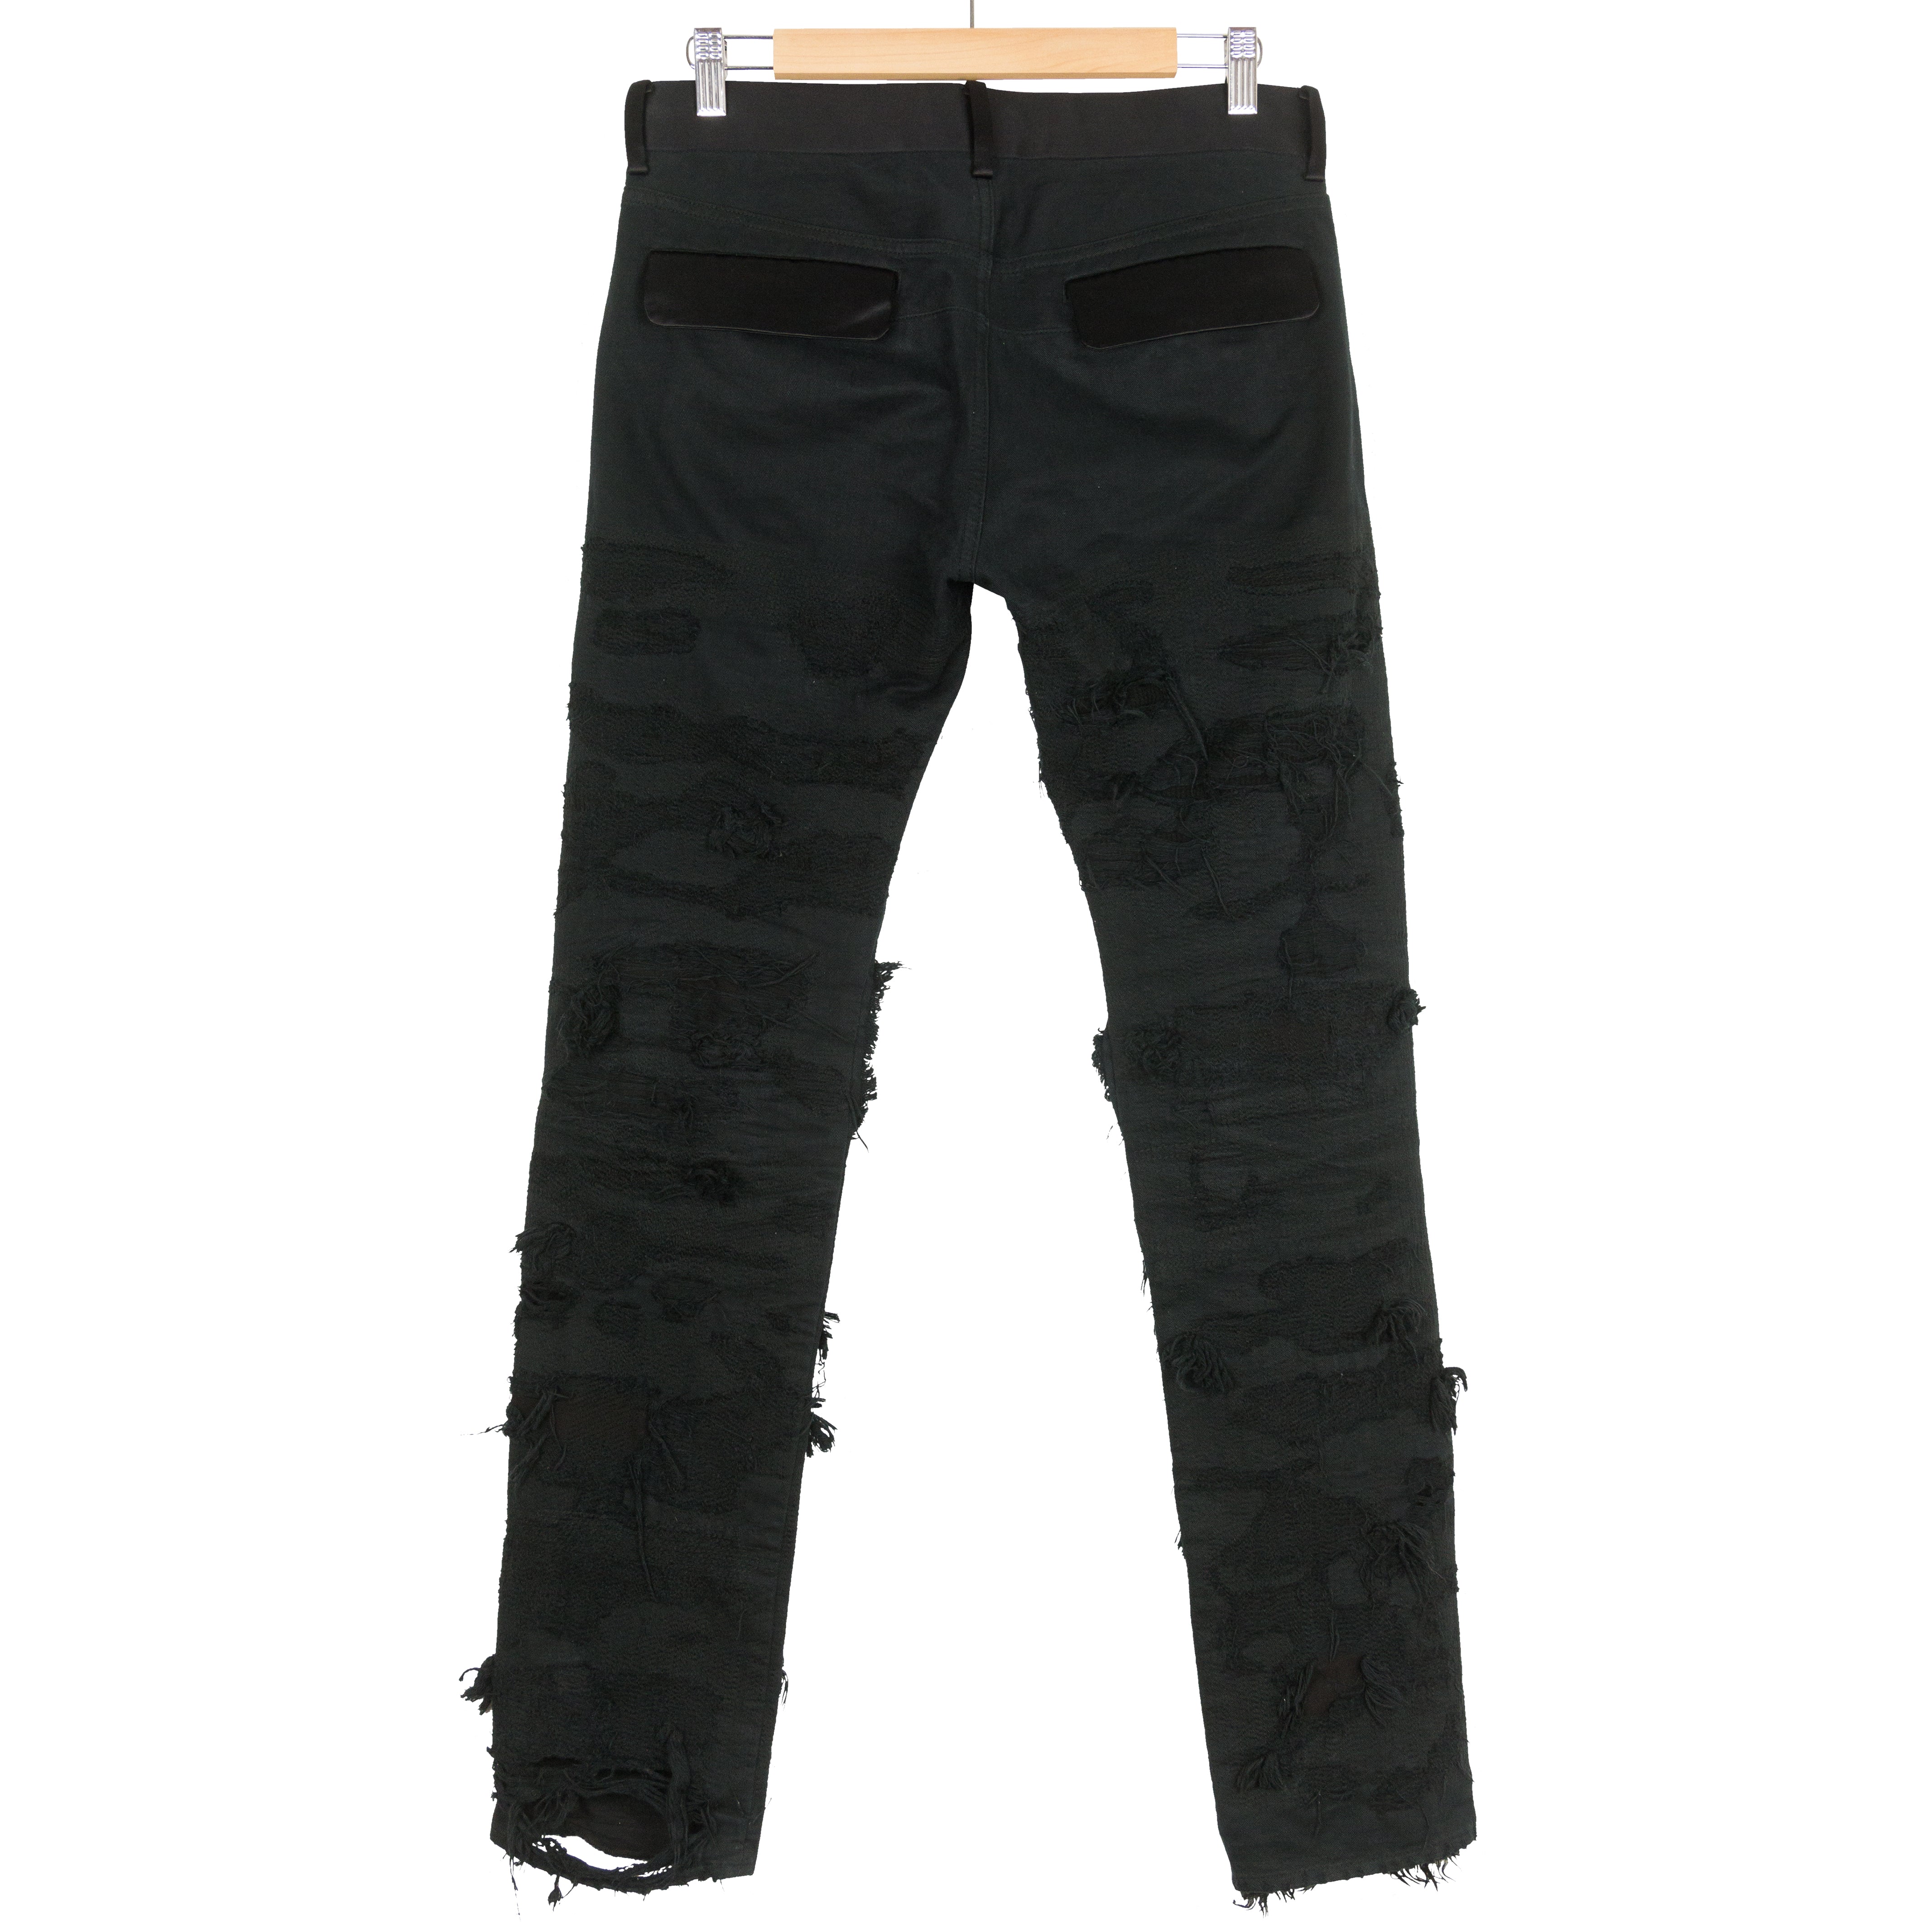 Undercover 78 Jeans - AW09 